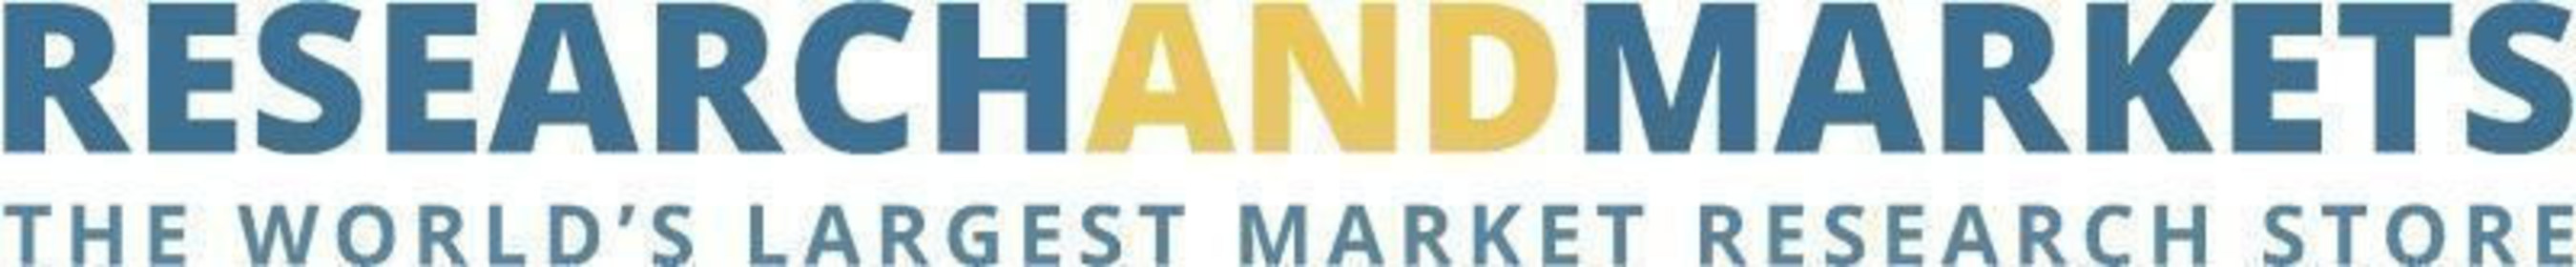 Research and Markets Logo. (PRNewsFoto/Research and Markets)